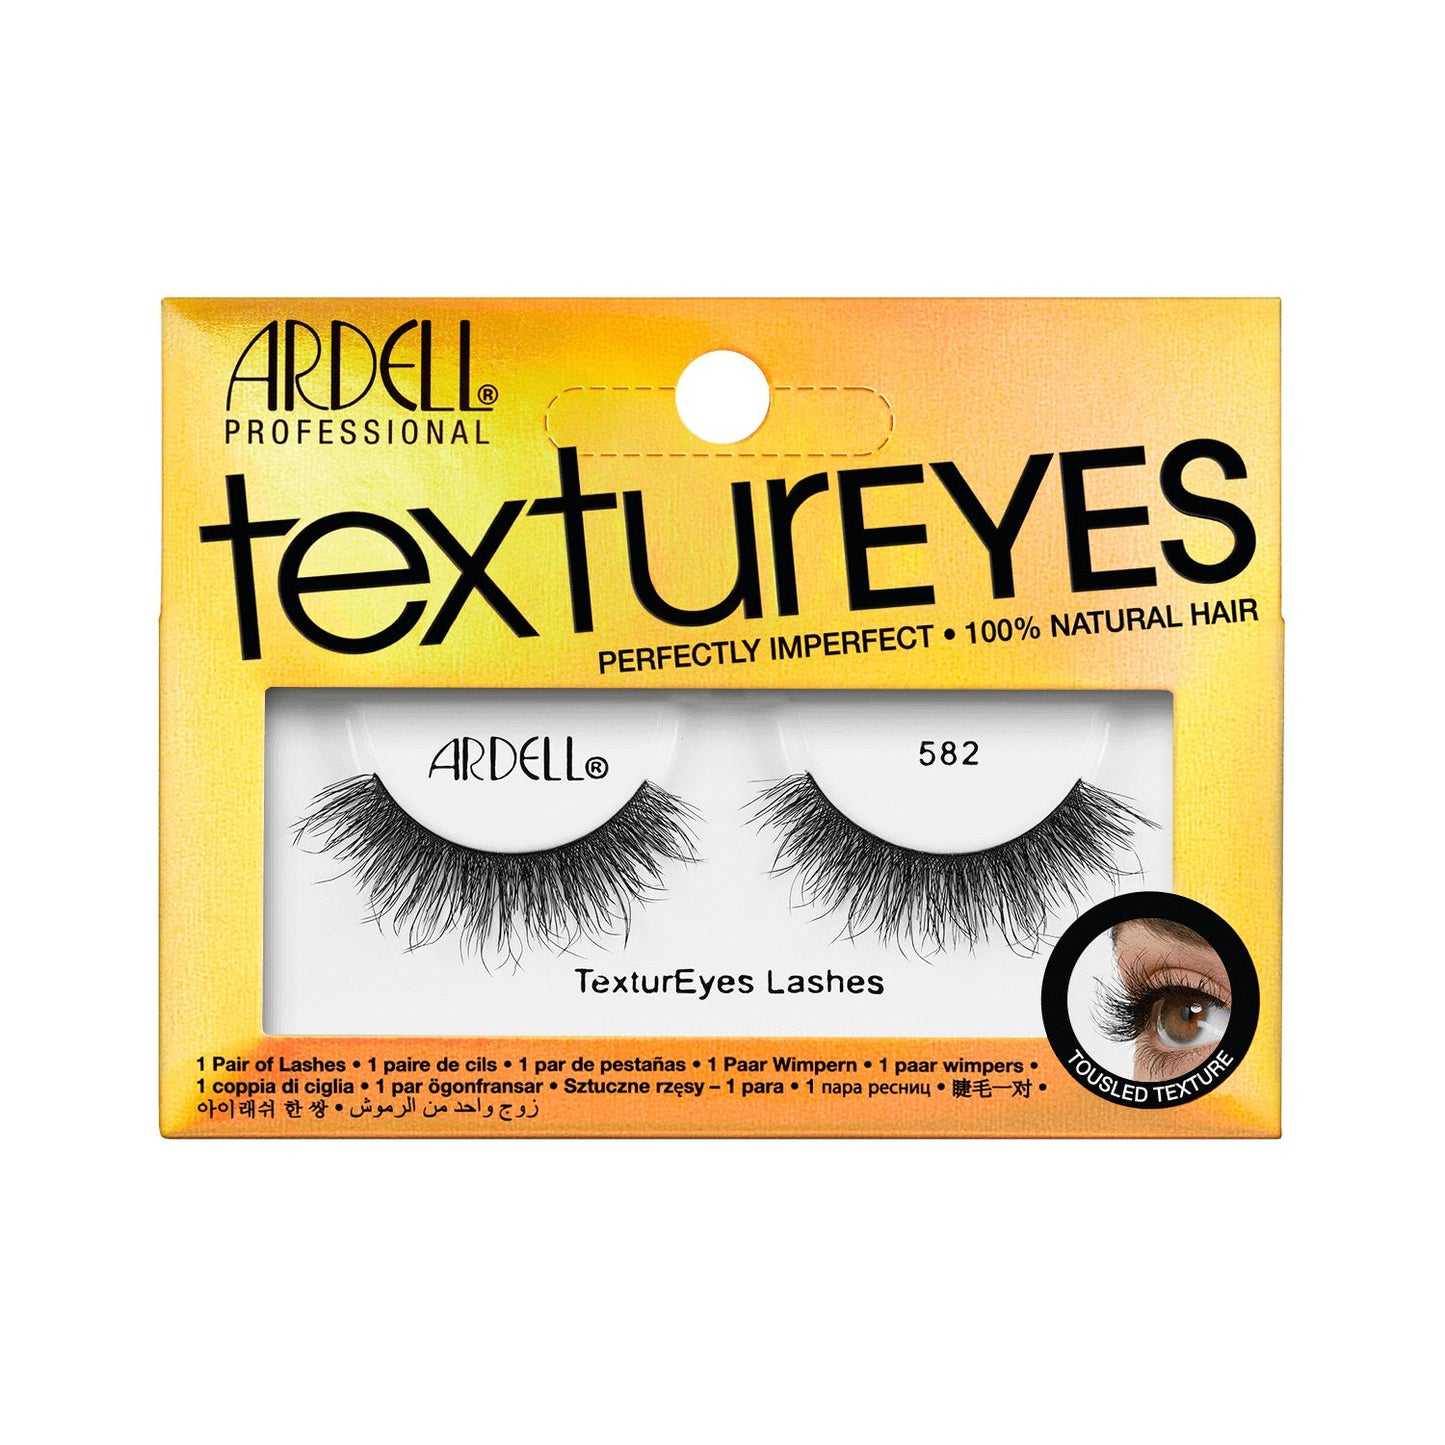 TexturEyes Lashes  by   Ardell TexturEyes #582 Lashes